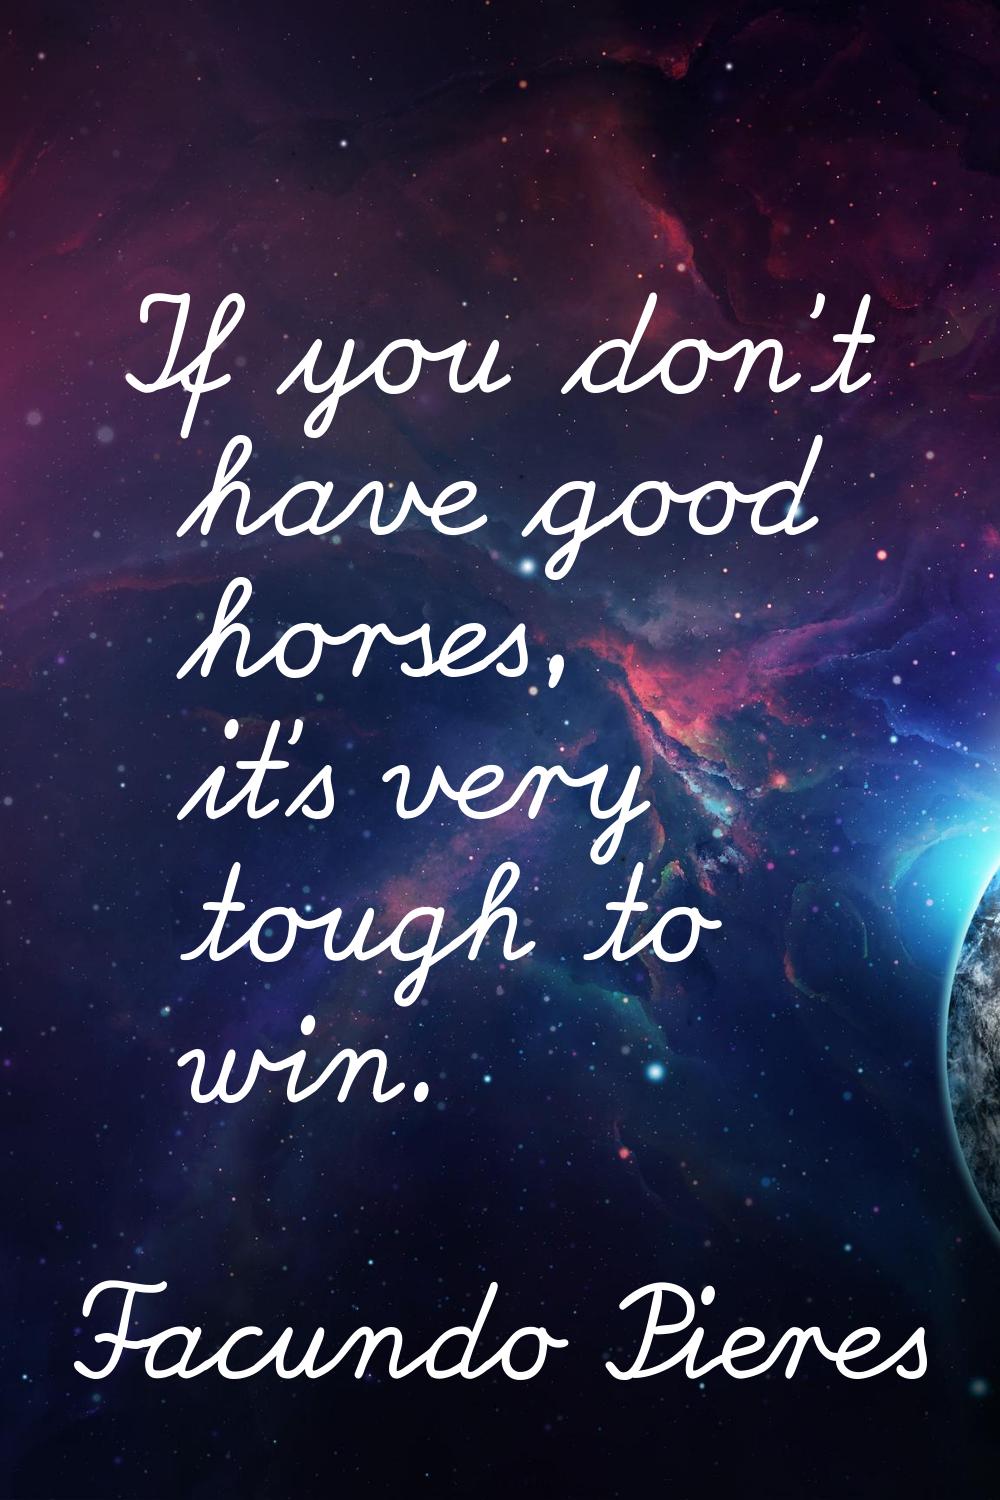 If you don't have good horses, it's very tough to win.